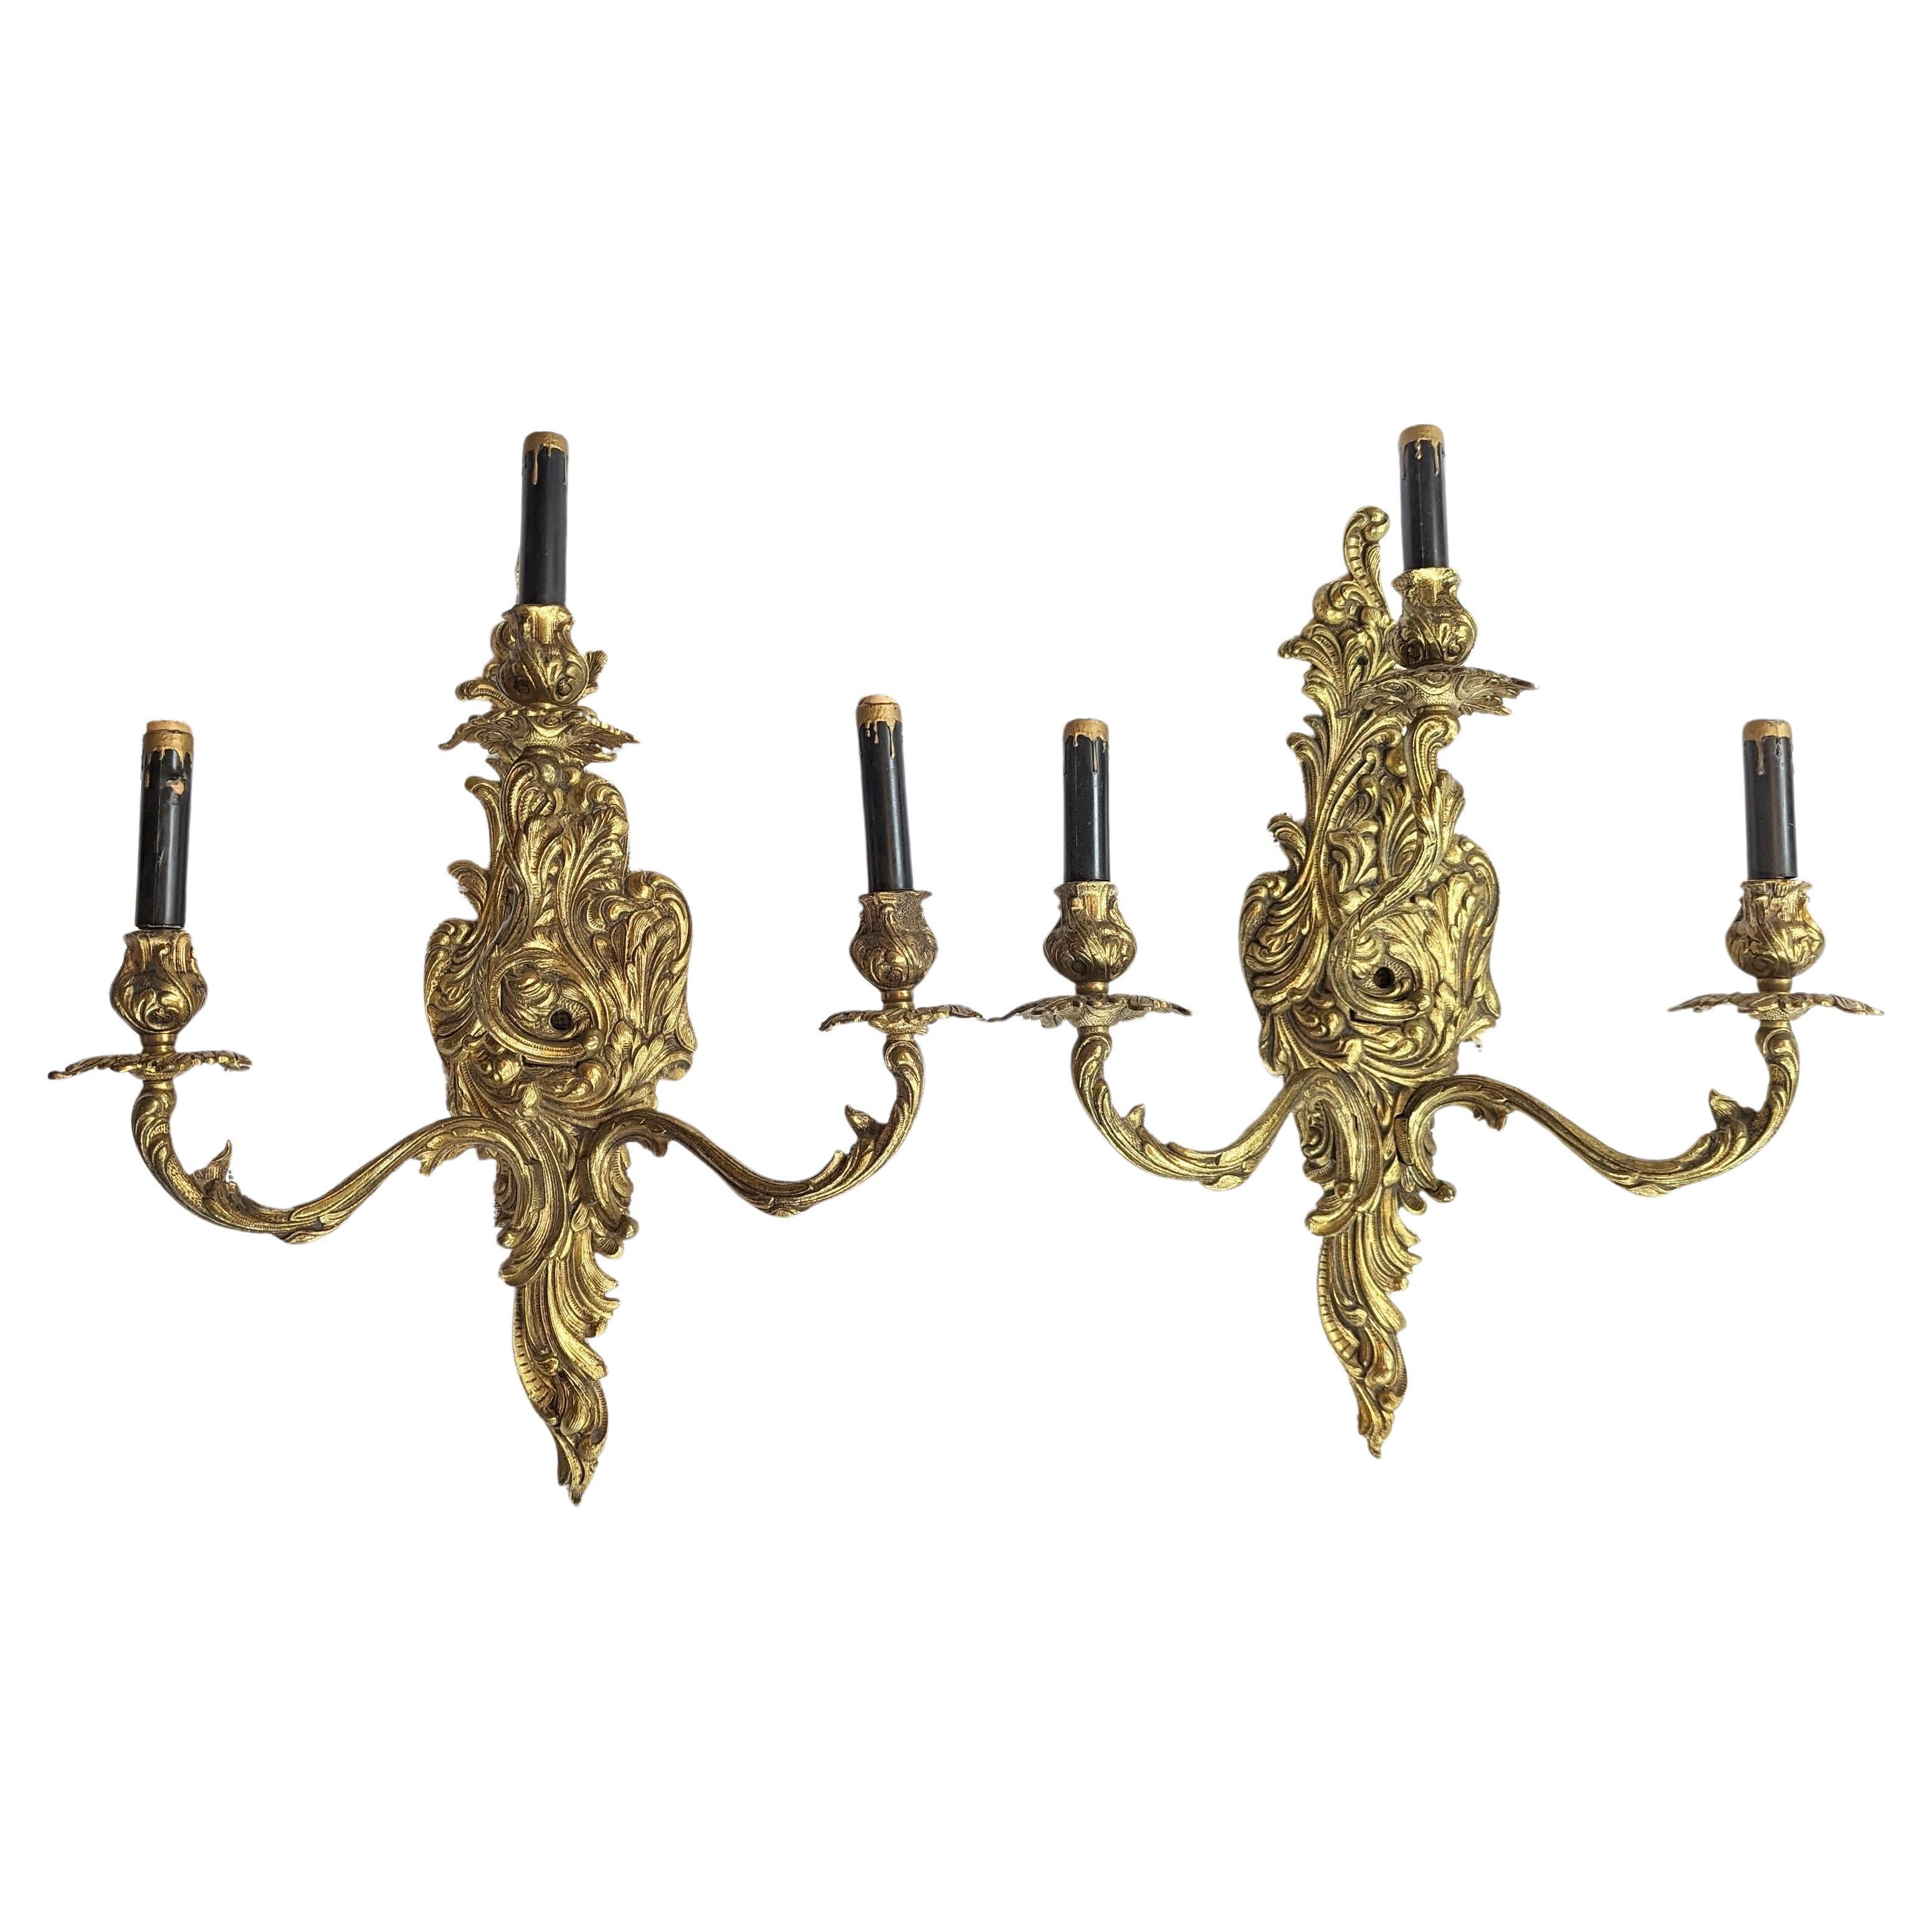 Pair of Antique French Gilded Sconces - 3 Light Armed Sconce European For Sale